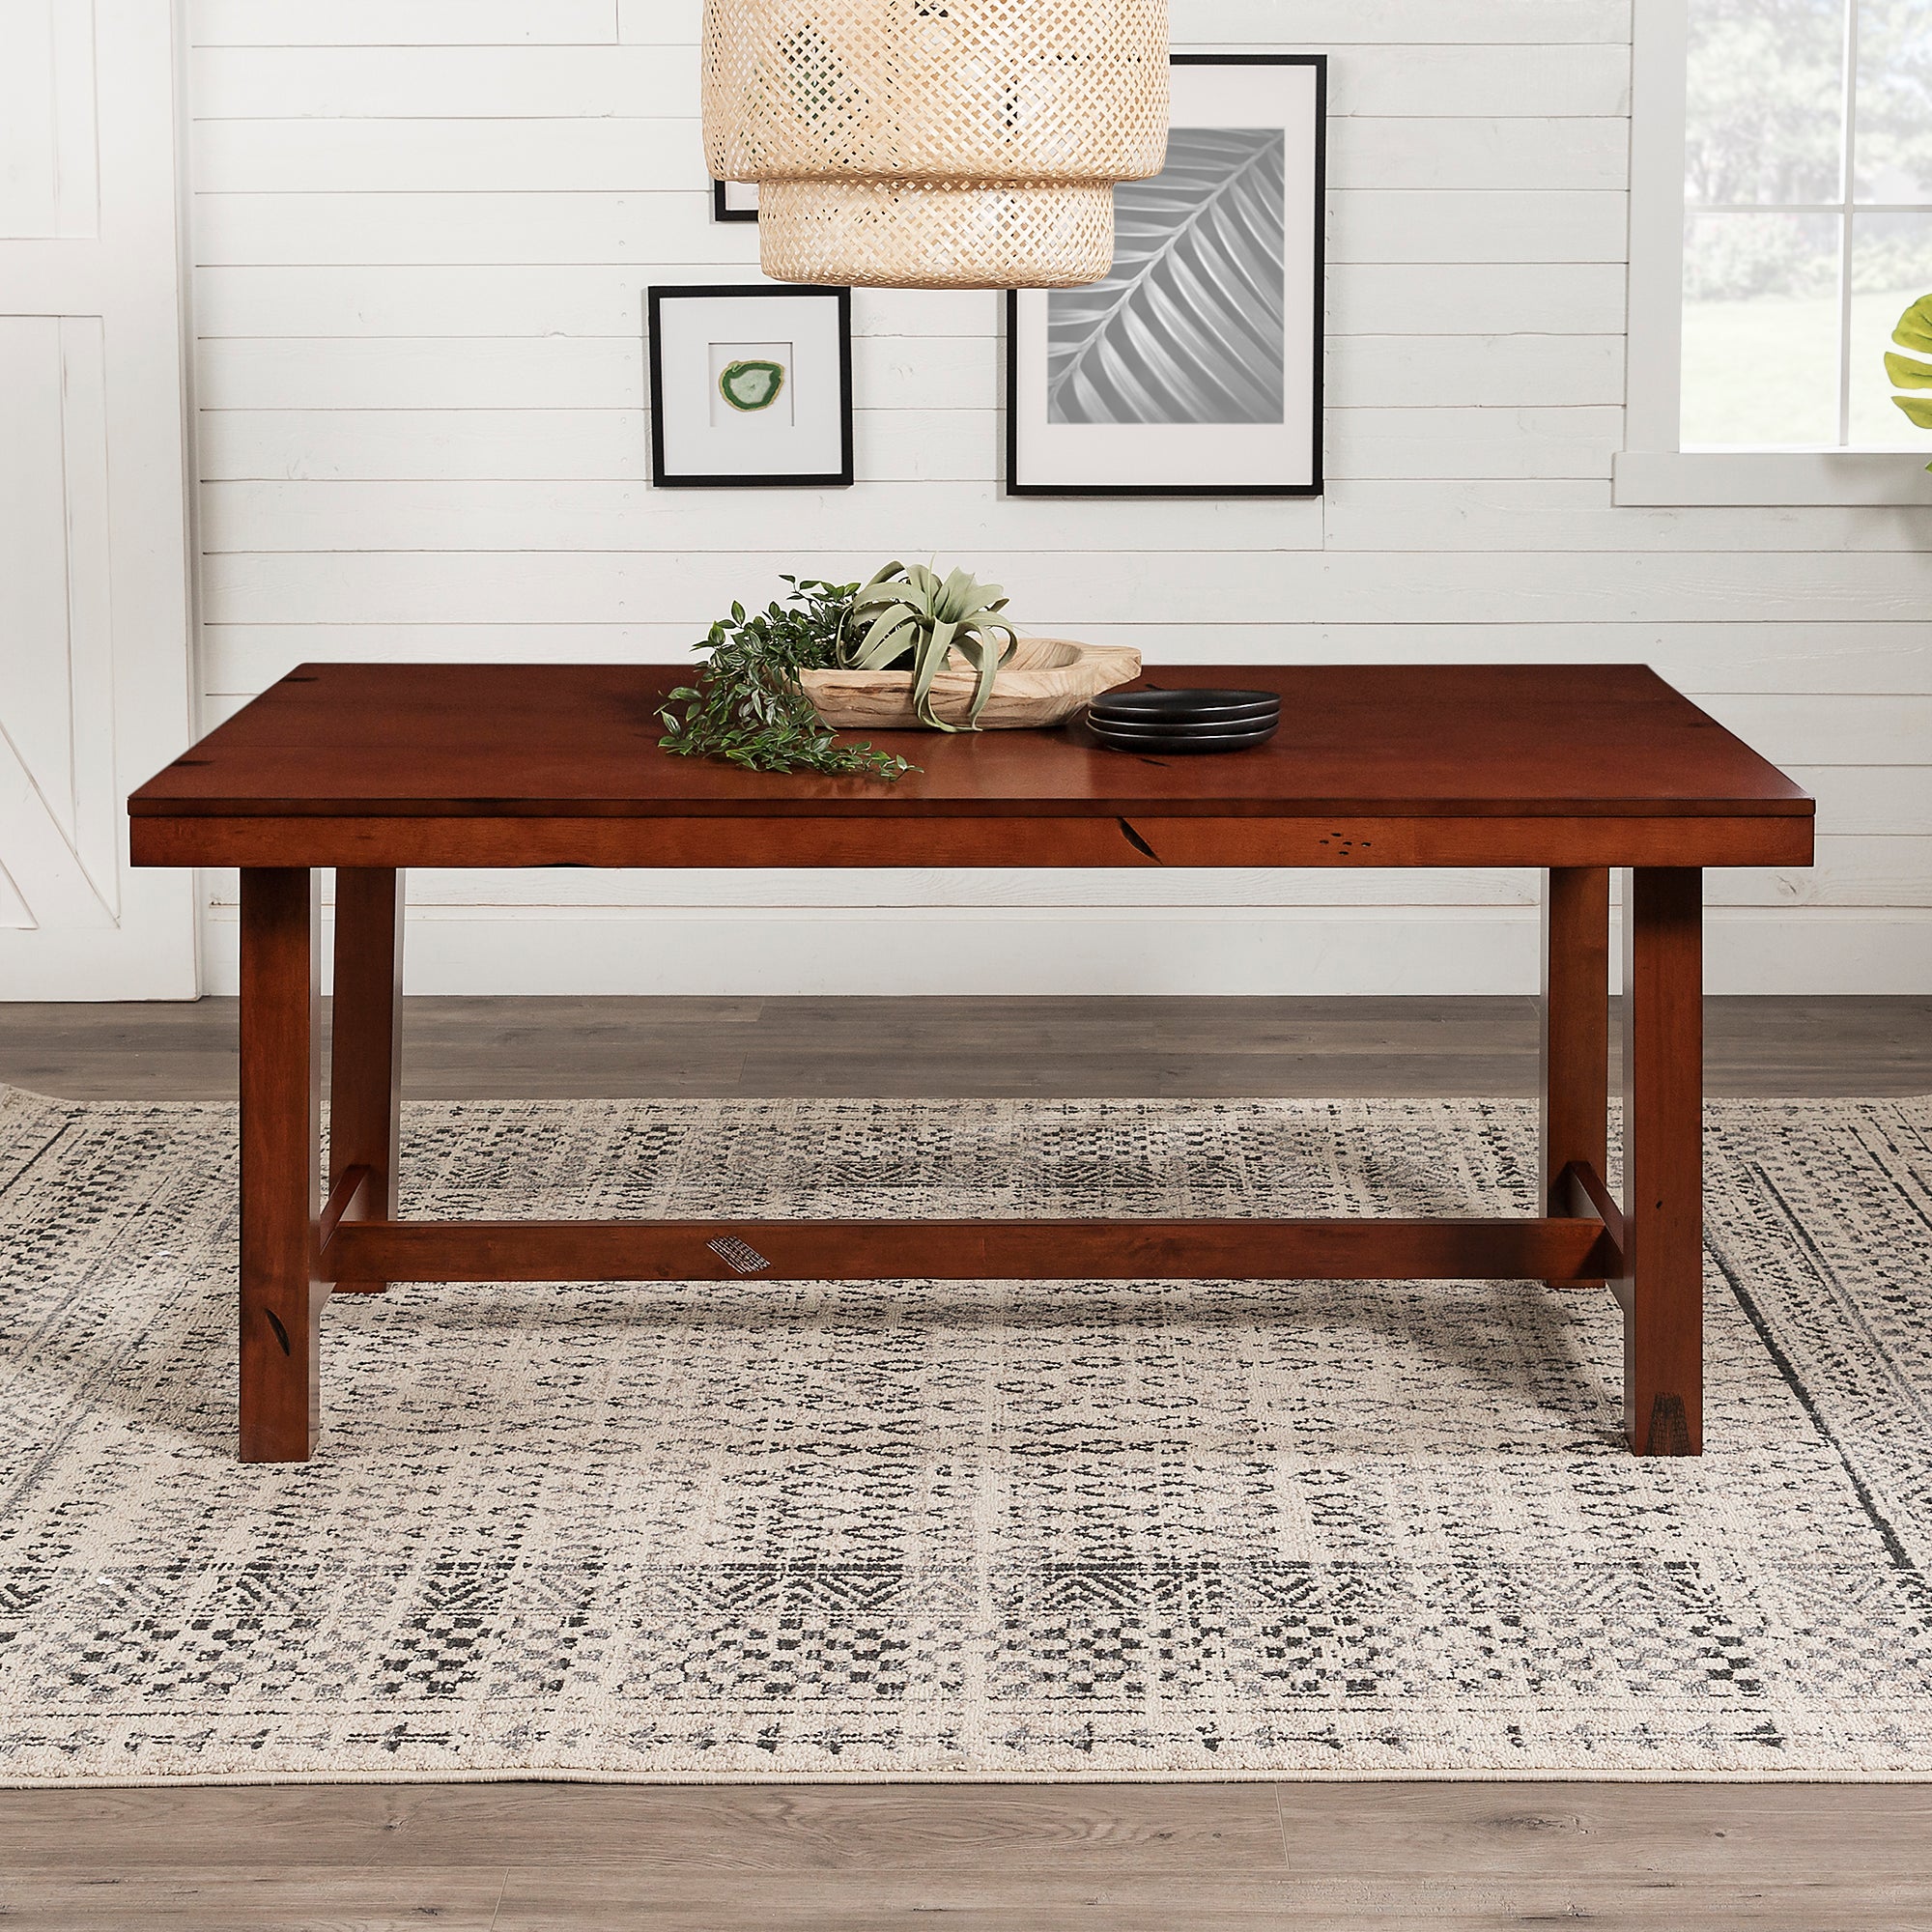 68" Rustic Wood Expandable Dining Table - East Shore Modern Home Furnishings